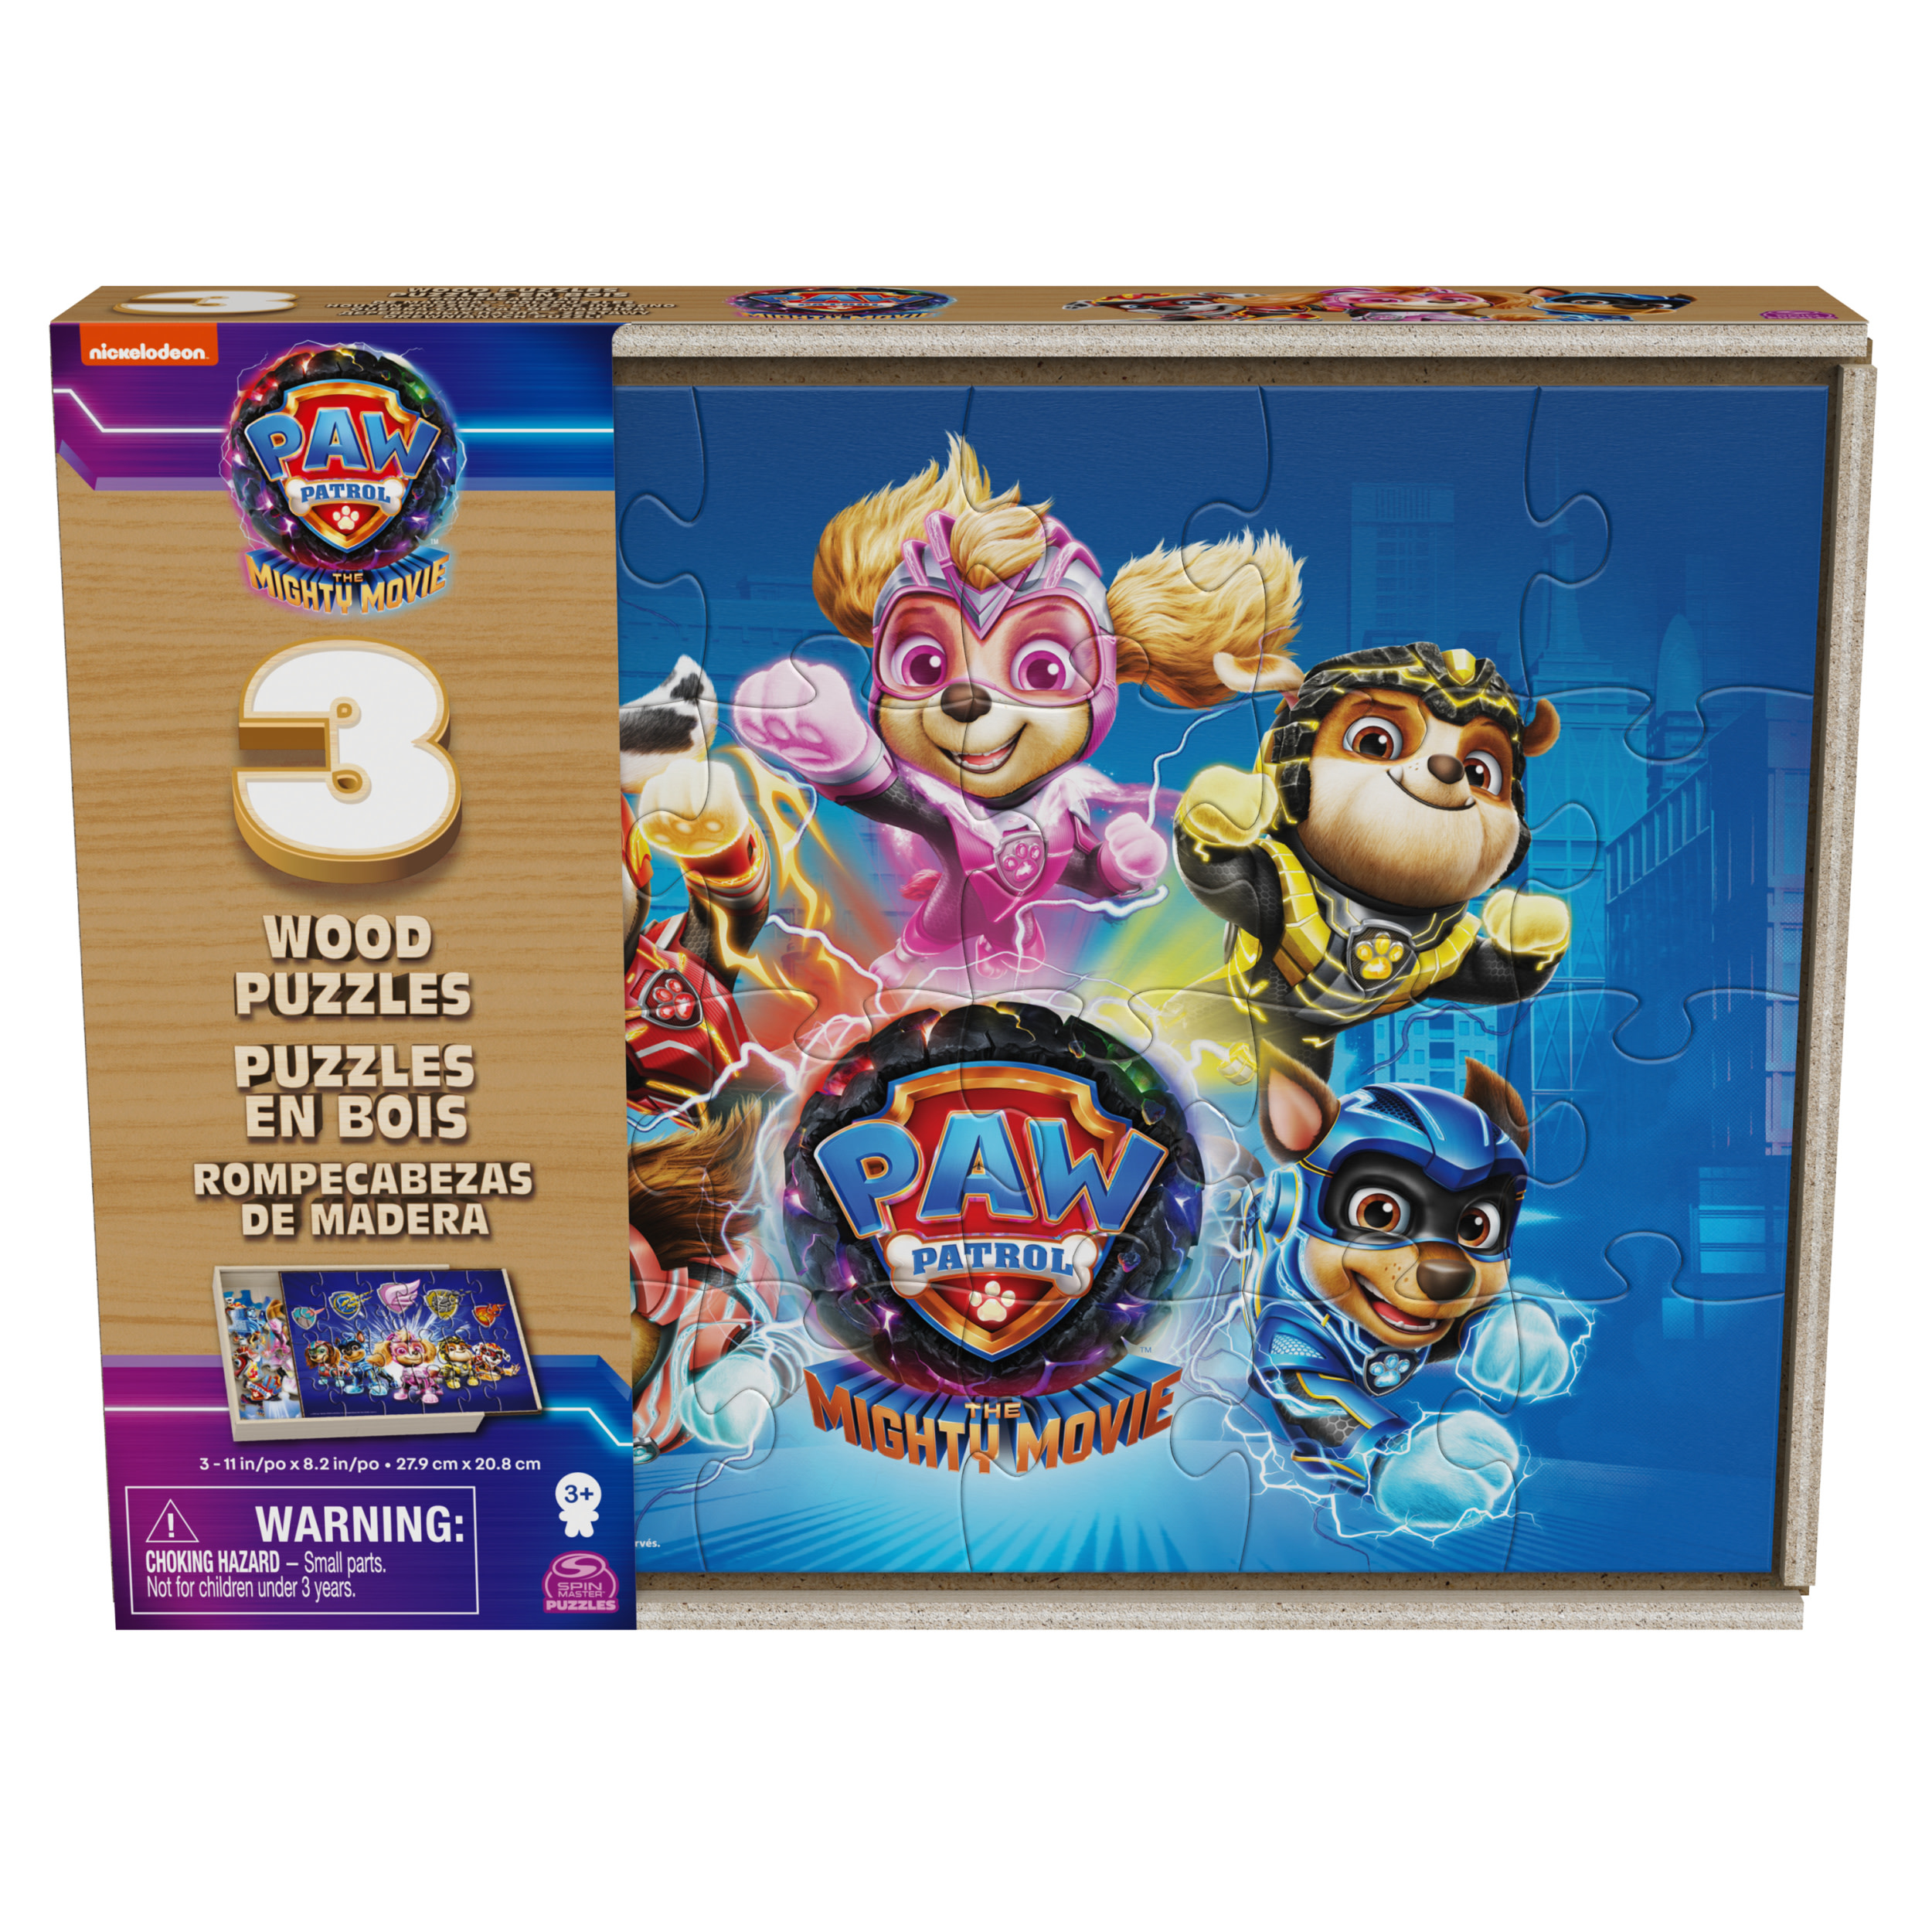 Spin Master PAW Patrol The Mighty Movie - 3 houten puzzels - 24-delig in opbergdoos